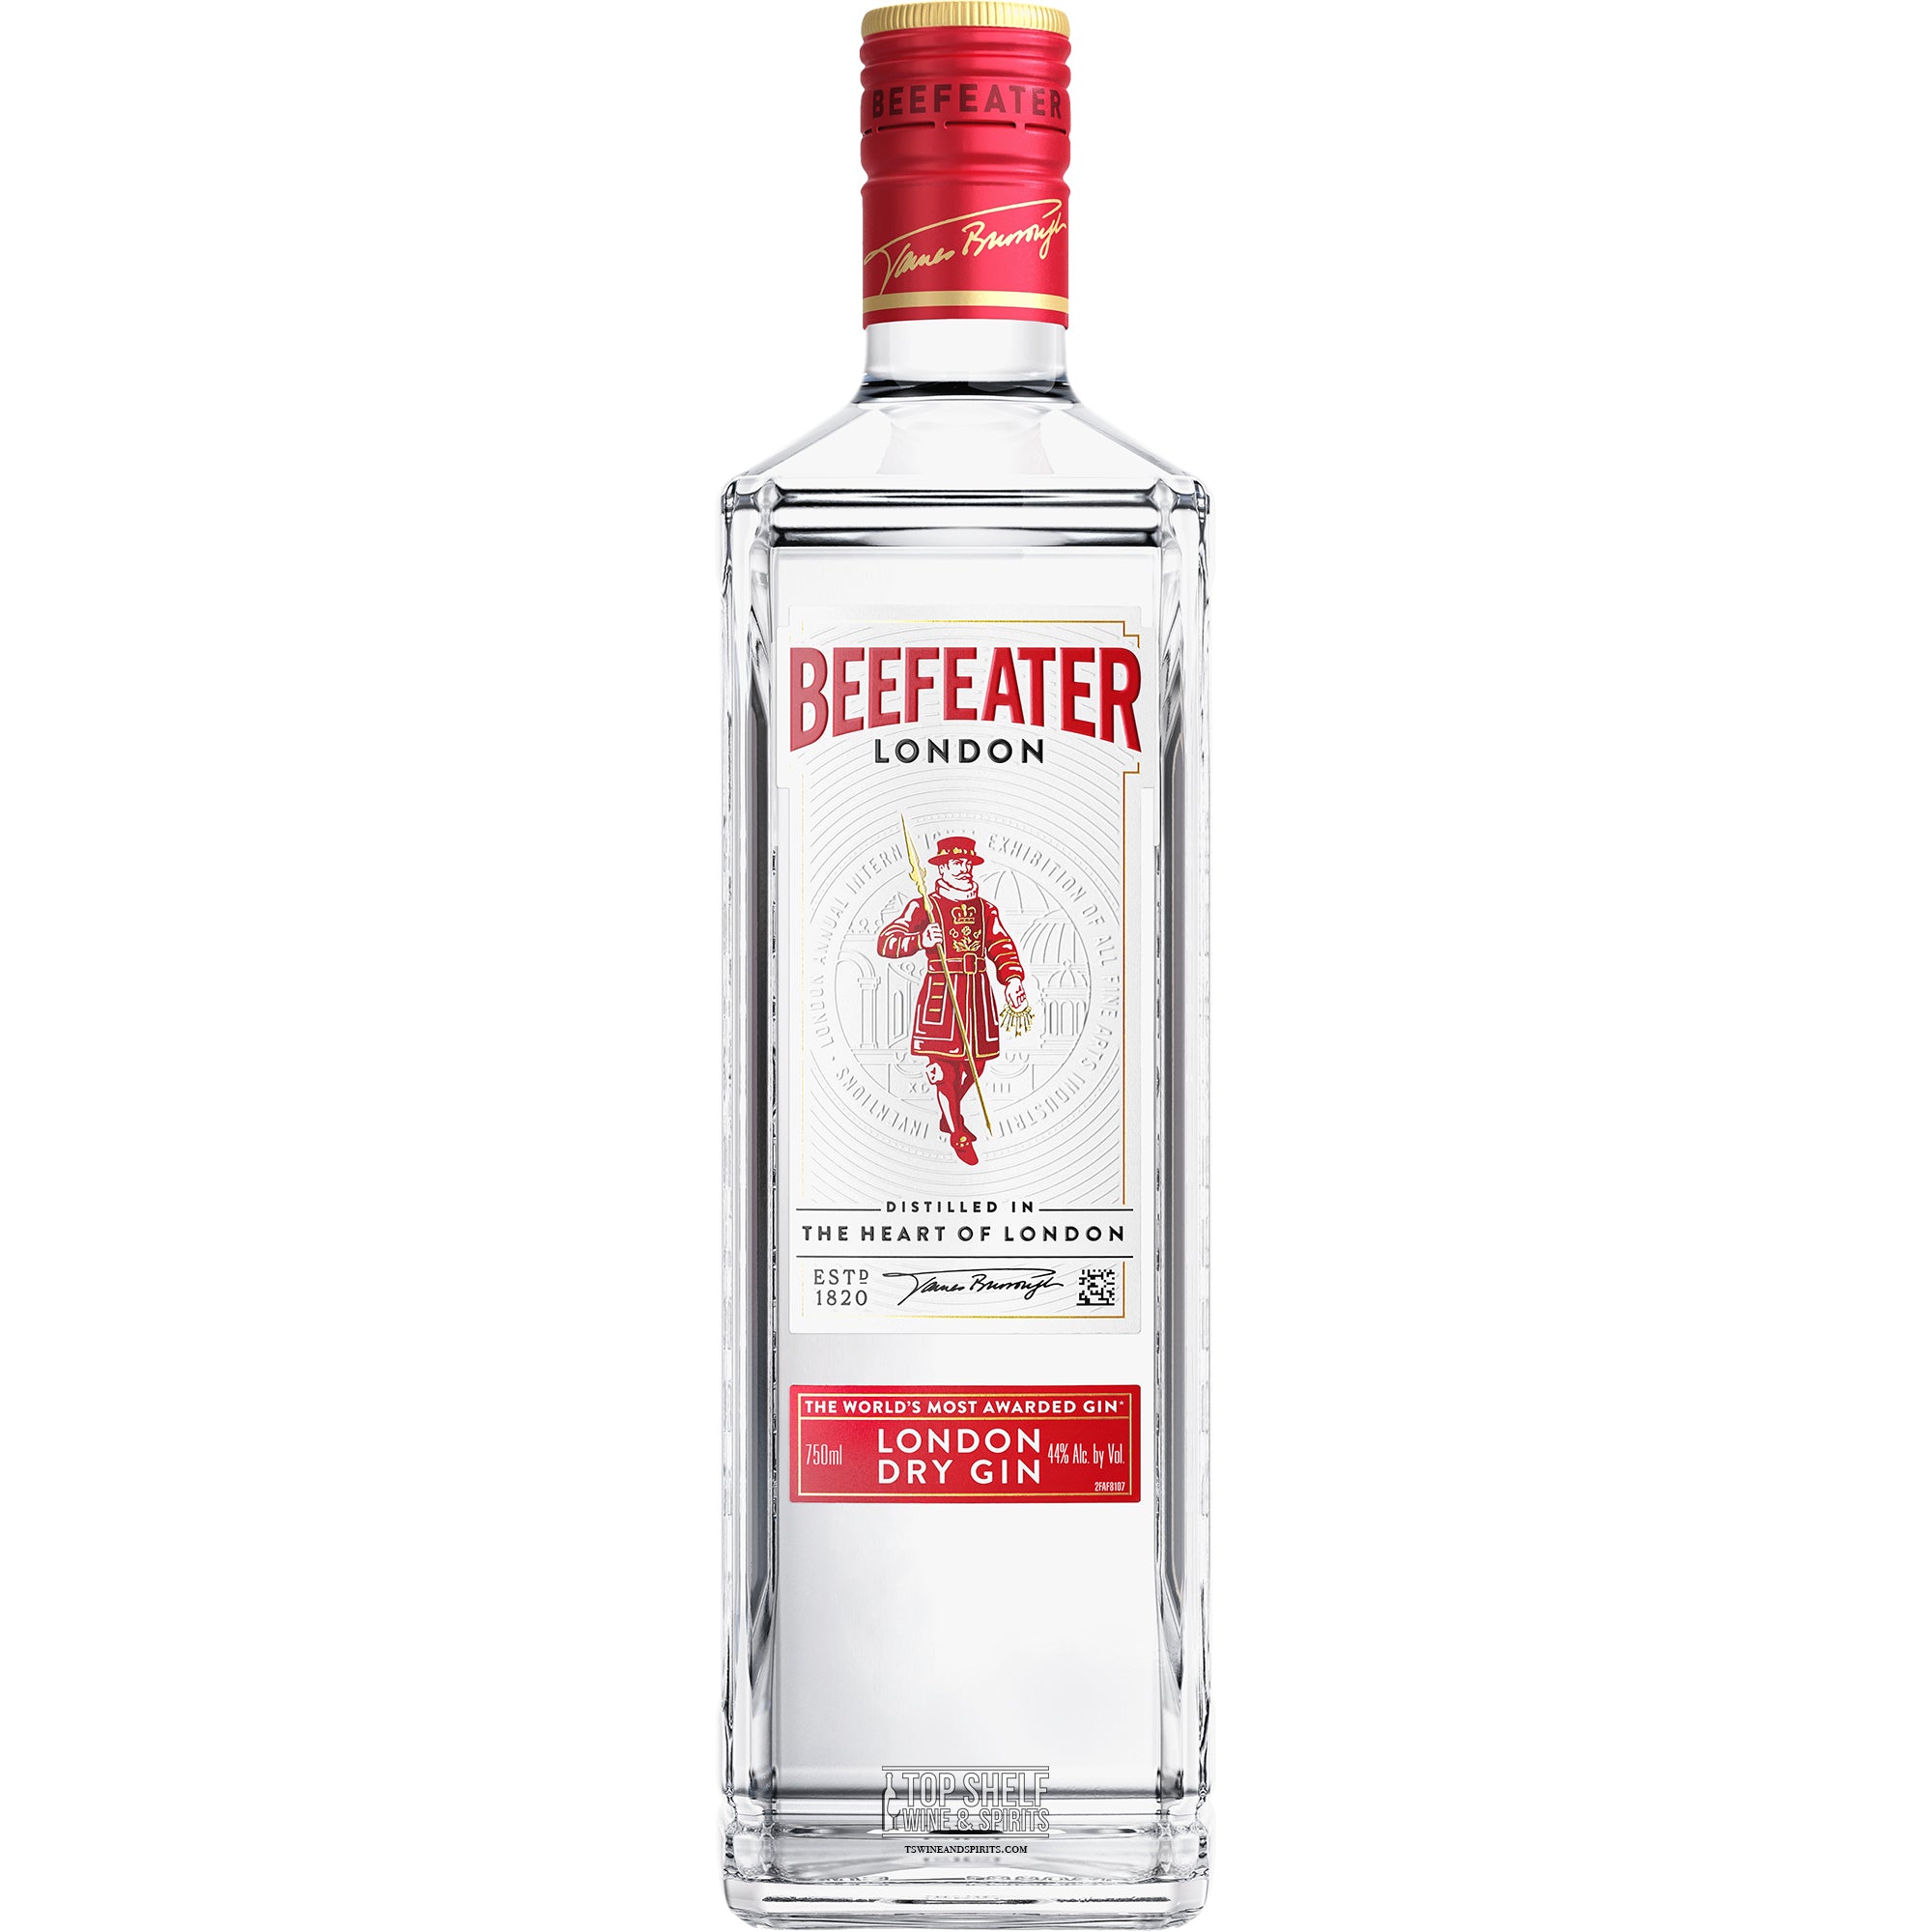 Beefeater London | Delivery Dry Gin & (Gluten Free) Gifting